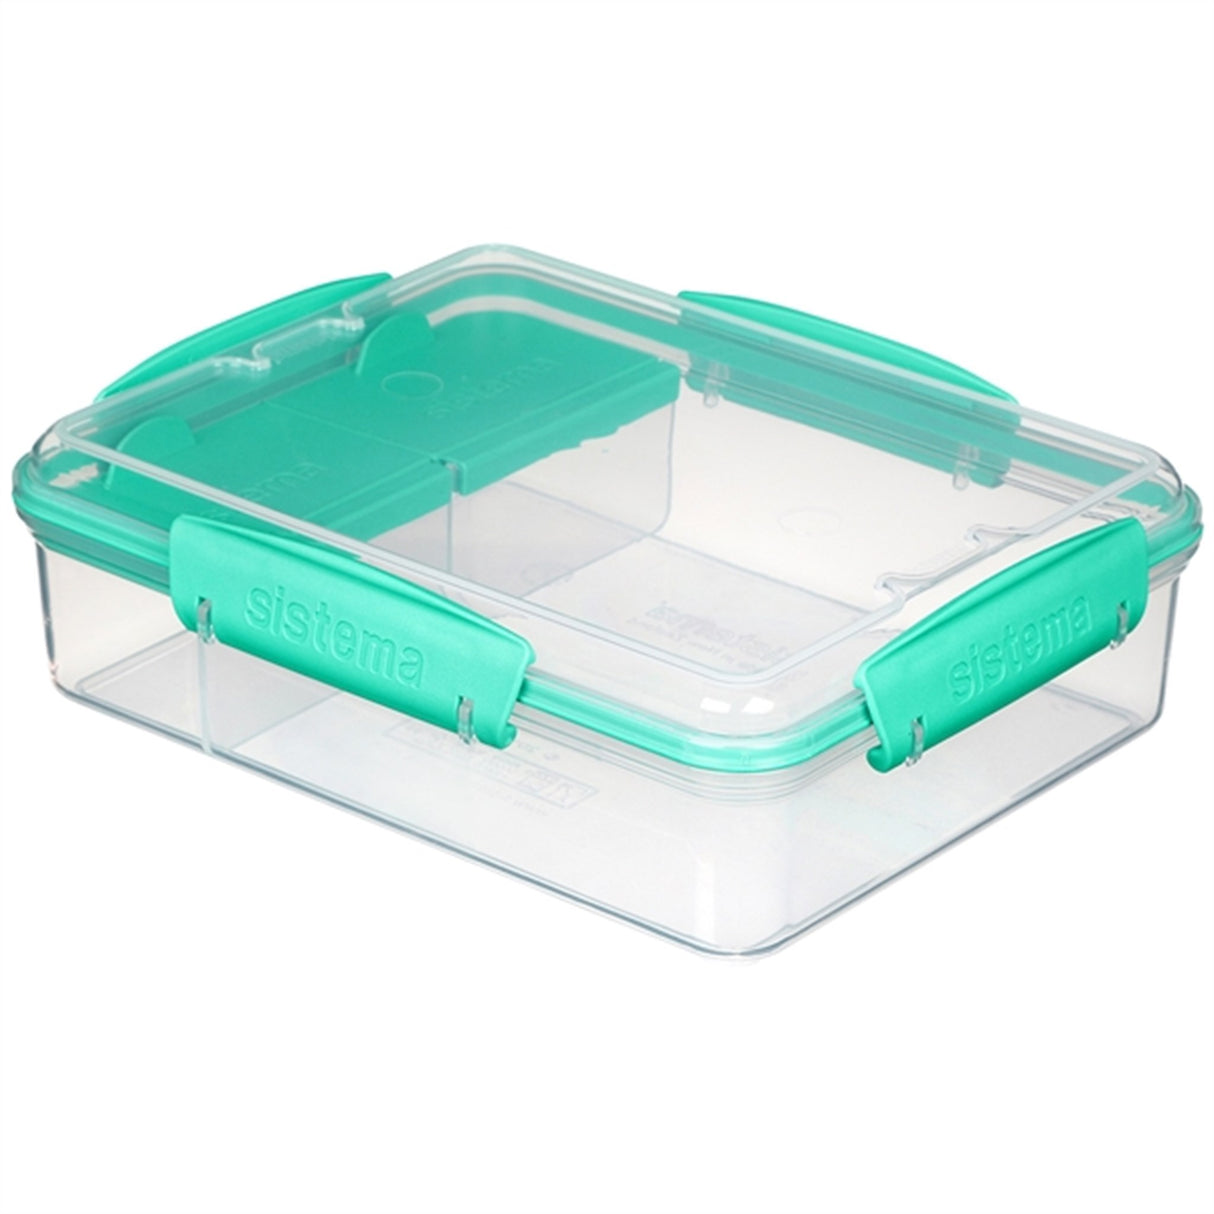 Sistema To Go Snack Attack Duo Lunchlåda 975 ml Minty Teal